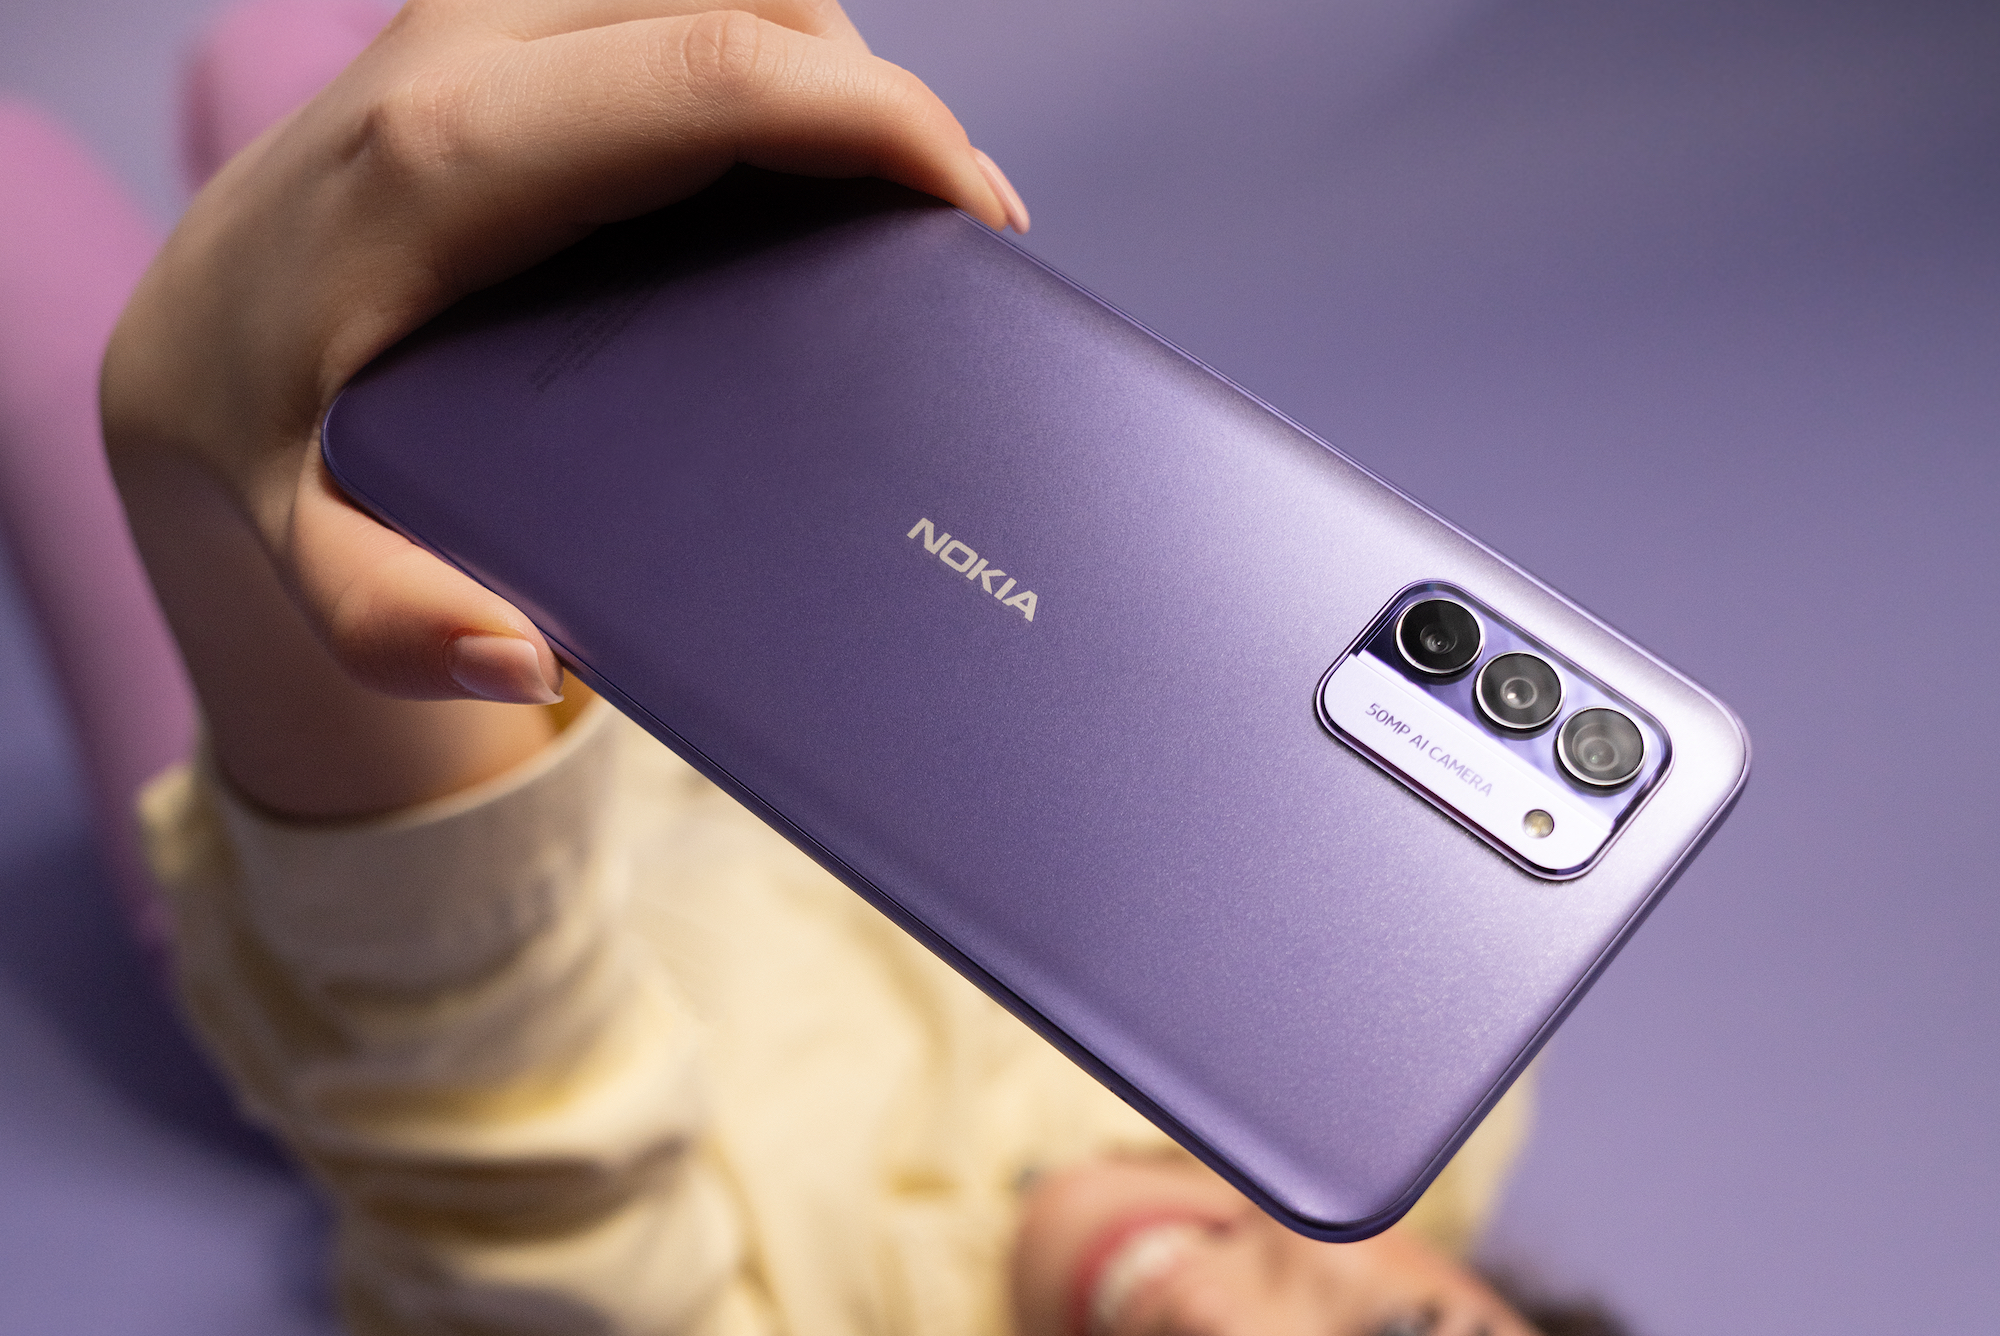 Nokia's newest Android phone has an unbelievably cool feature